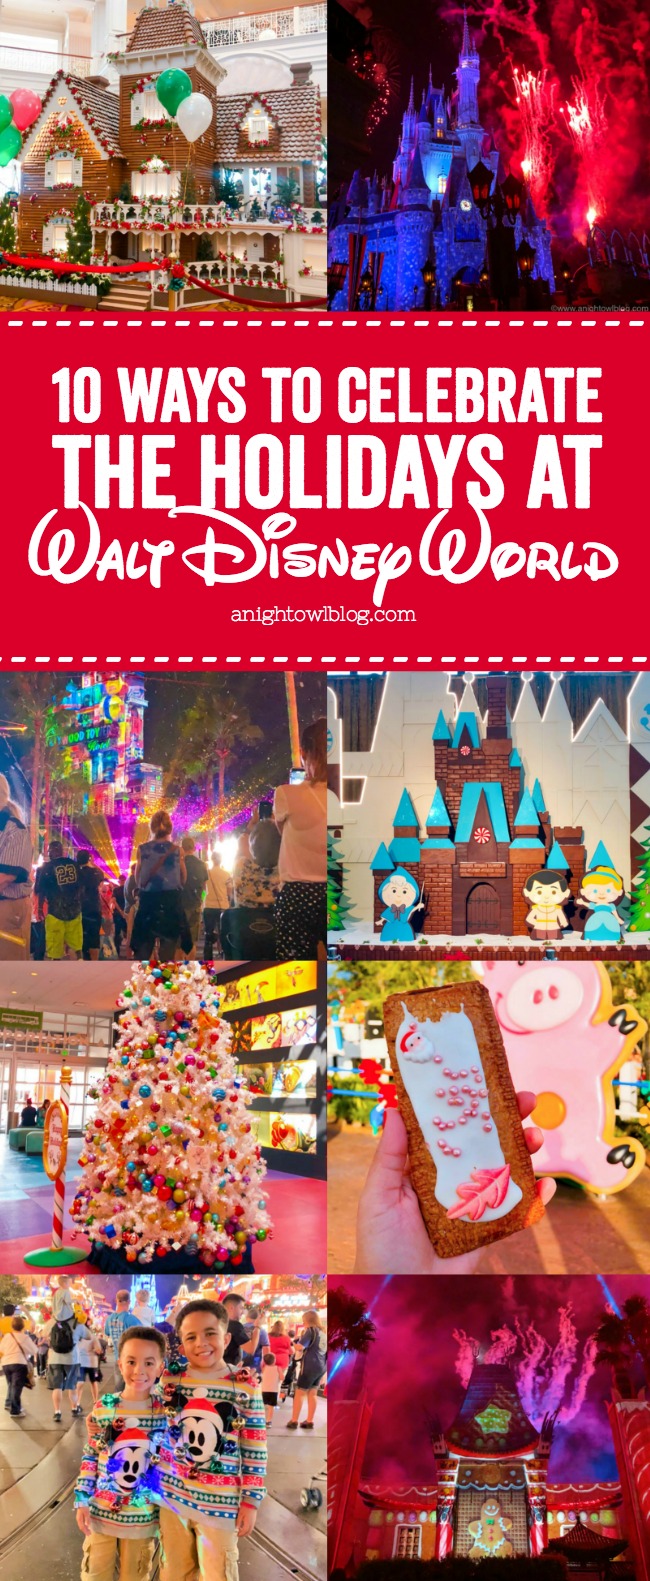 From Mickey's Very Merry Christmas to holiday decor, treats and more, discover our top 10 Ways to Celebrate the Holidays at Walt Disney World!